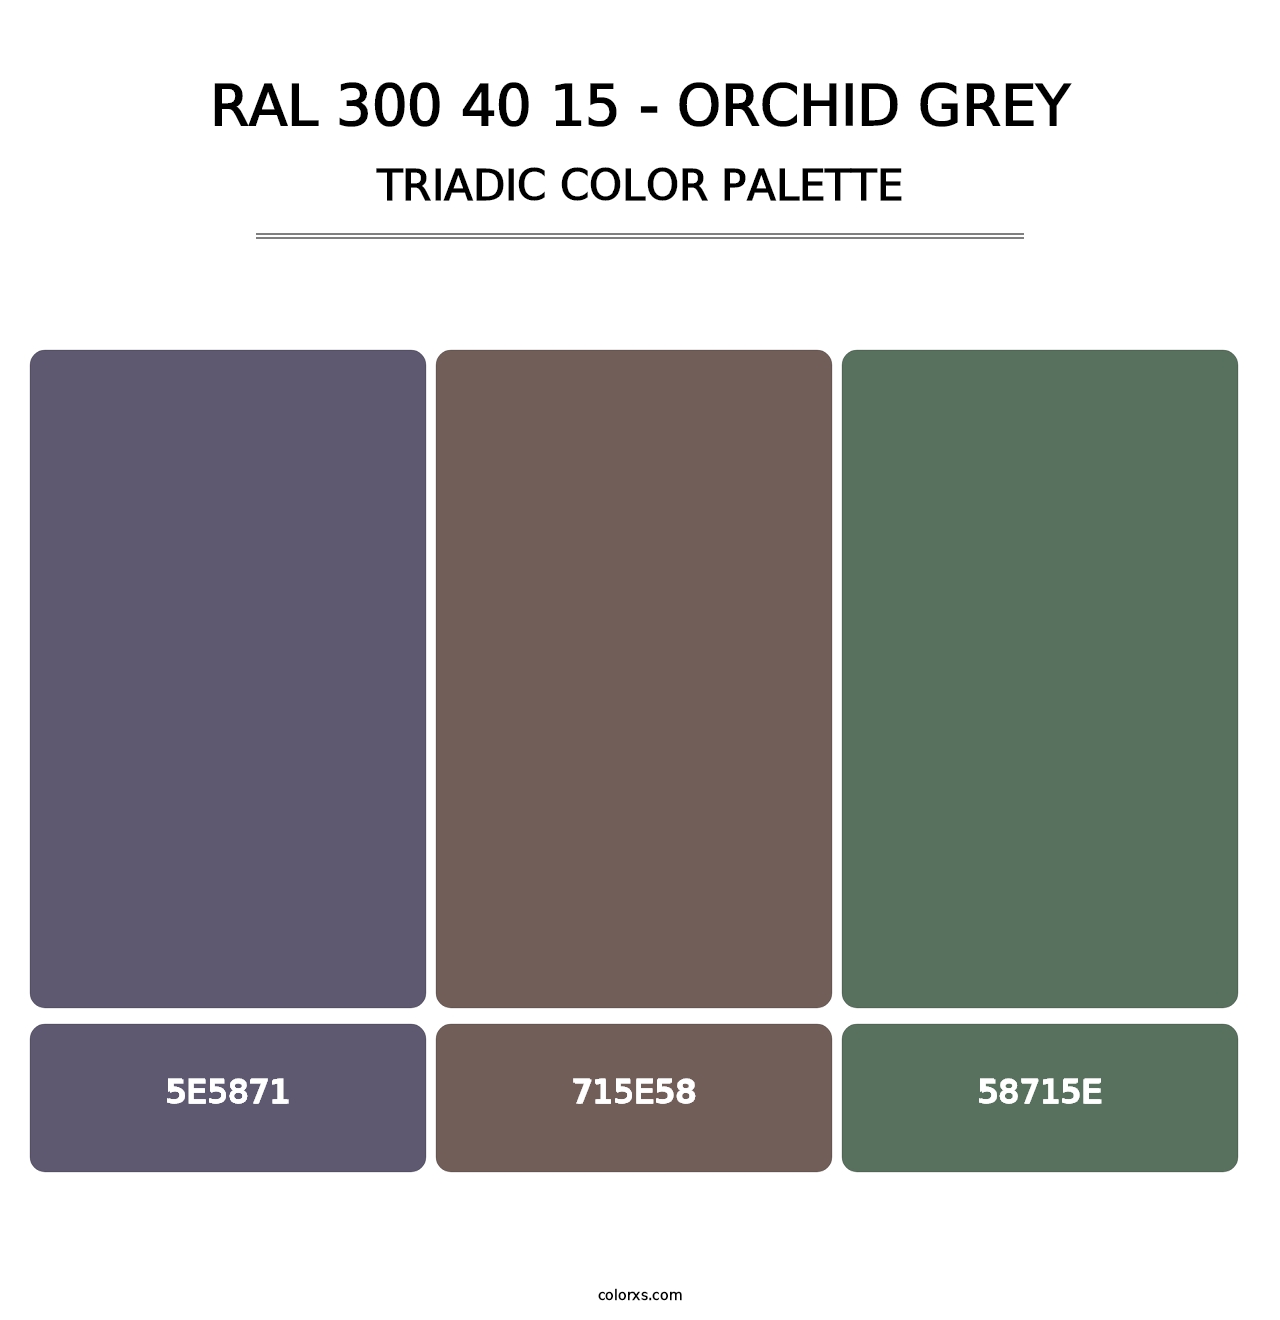 RAL 300 40 15 - Orchid Grey - Triadic Color Palette